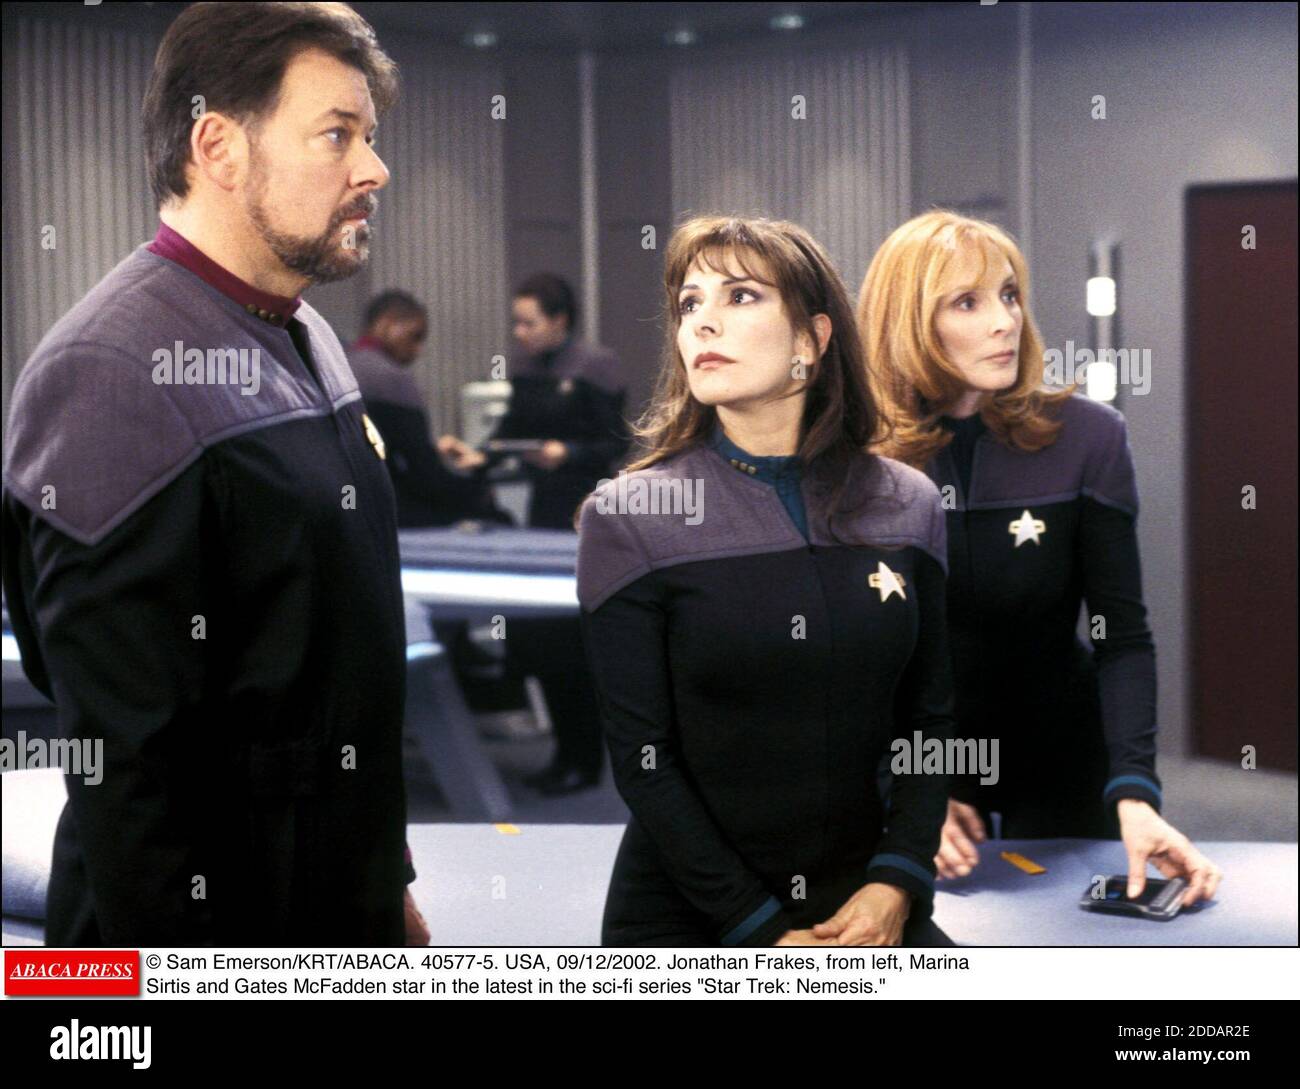 NO FILM, NO VIDEO, NO TV, NO DOCUMENTARY - © Sam Emerson/KRT/ABACA. 40577-5. USA, 09/12/2002. Jonathan Frakes, from left, Marina Sirtis and Gates McFadden star in the latest in the sci-fi series Star Trek: Nemesis. Stock Photo